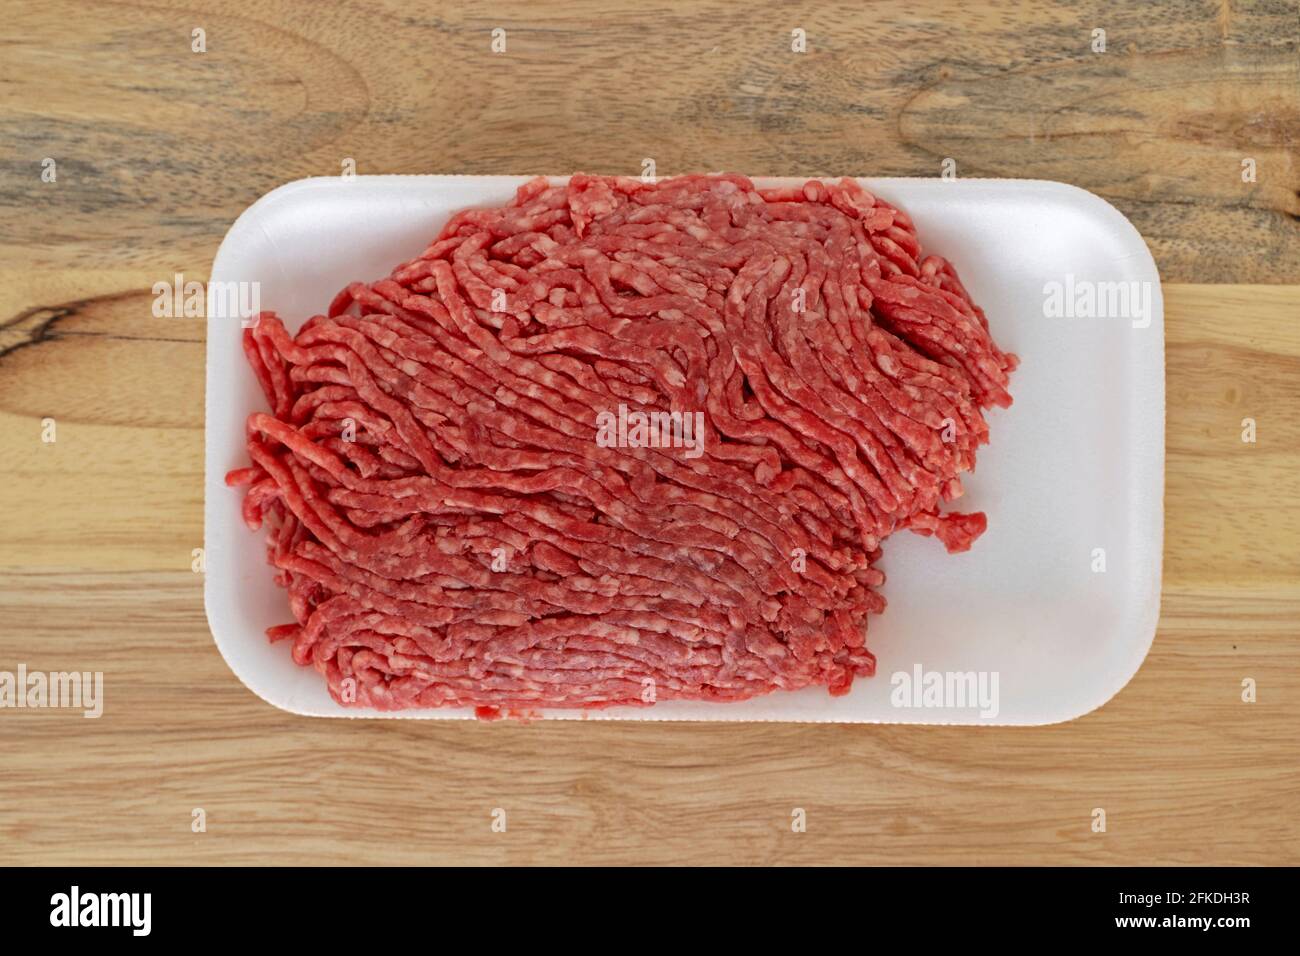 Package of Lean Ground Beef, Raw, Uncooked Stock Photo